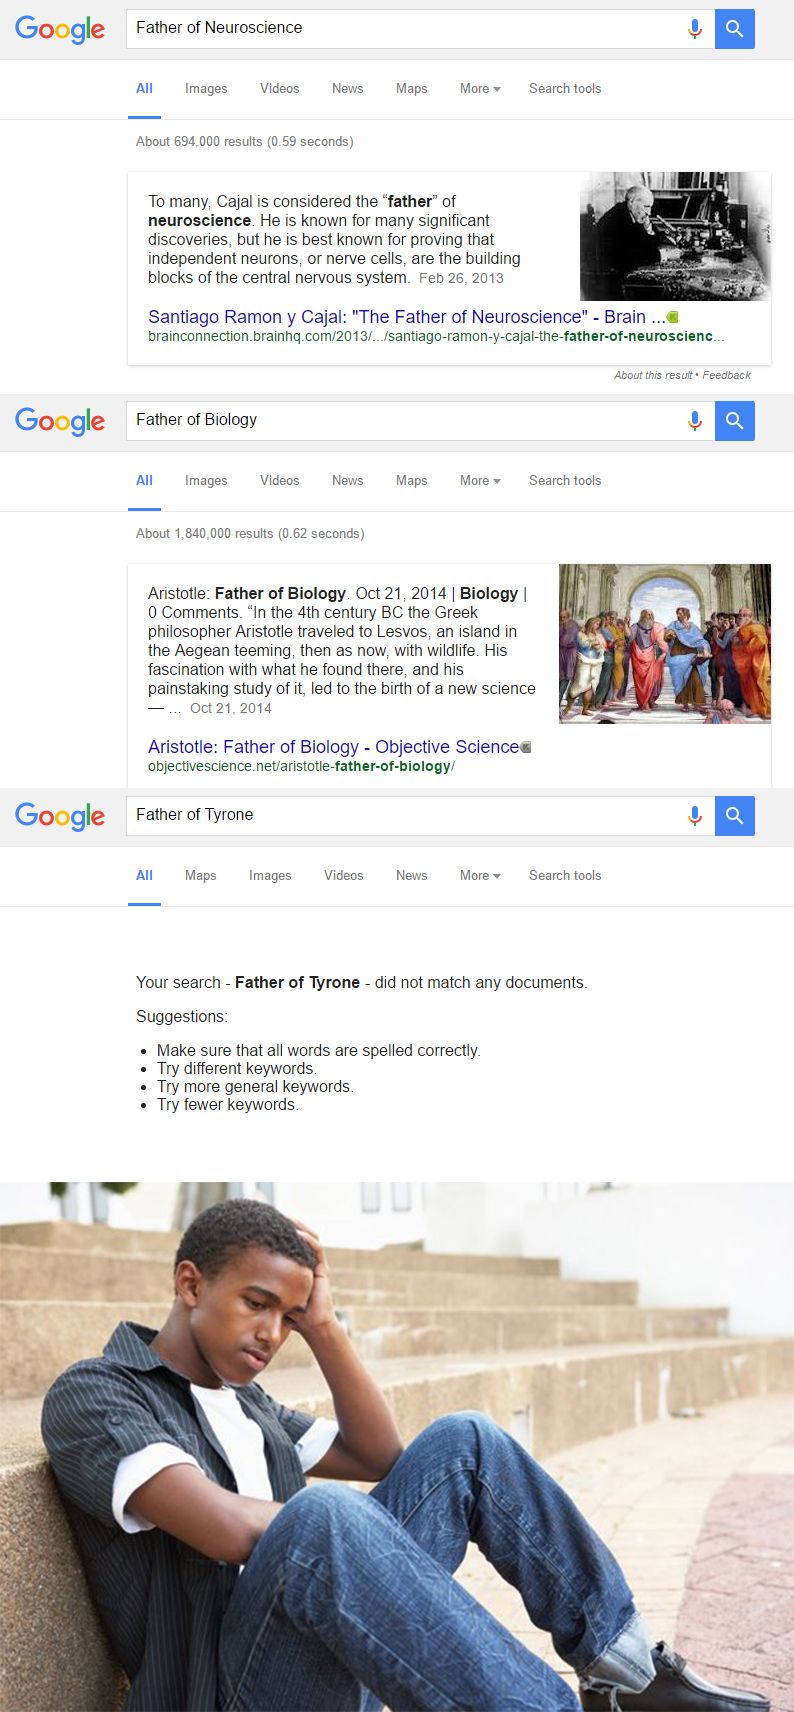 Guess Google can't find everything kid